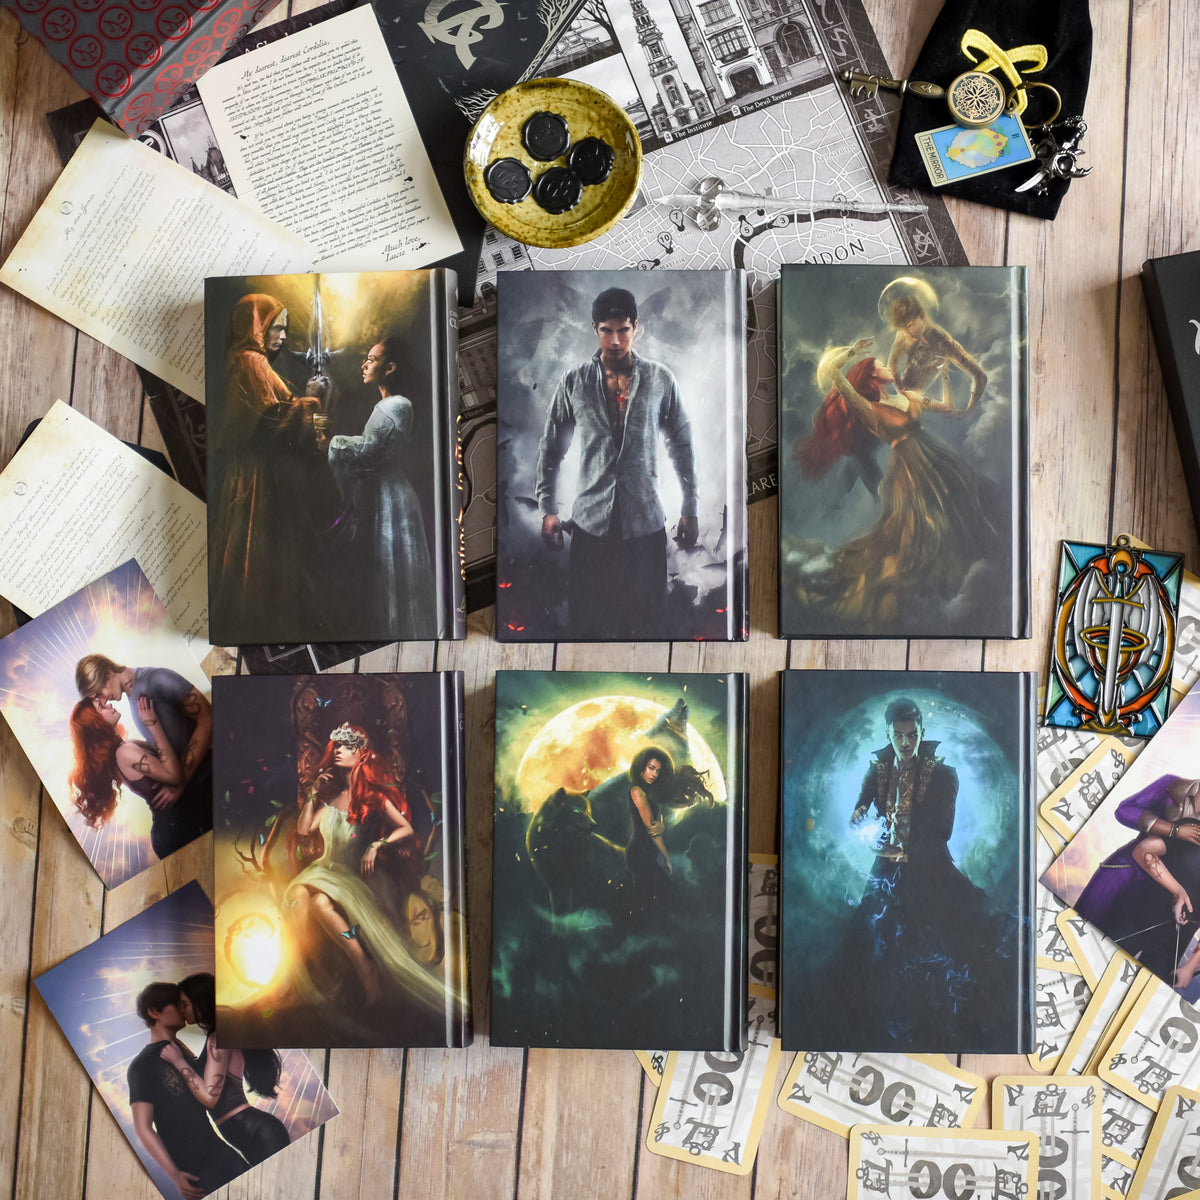 Special Edition The Mortal Instruments Box Set the covers with Shadowhunters of Simon, Jace, Clary, Isabel, Alec, and Magnus